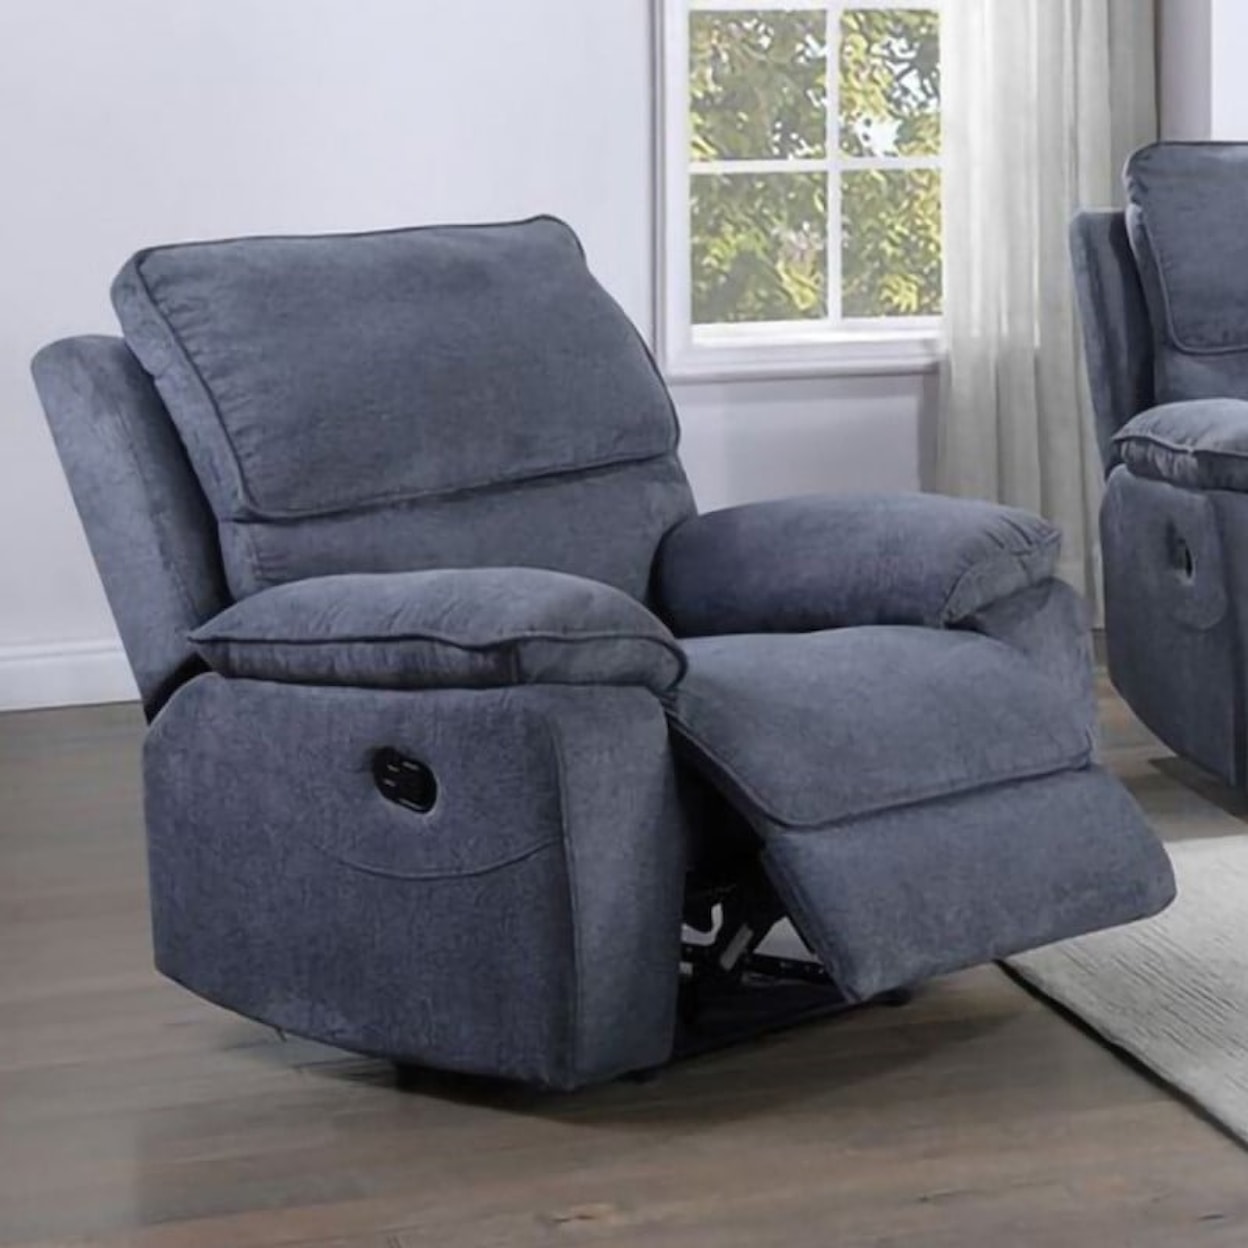 Lifestyle 81723 Recliner